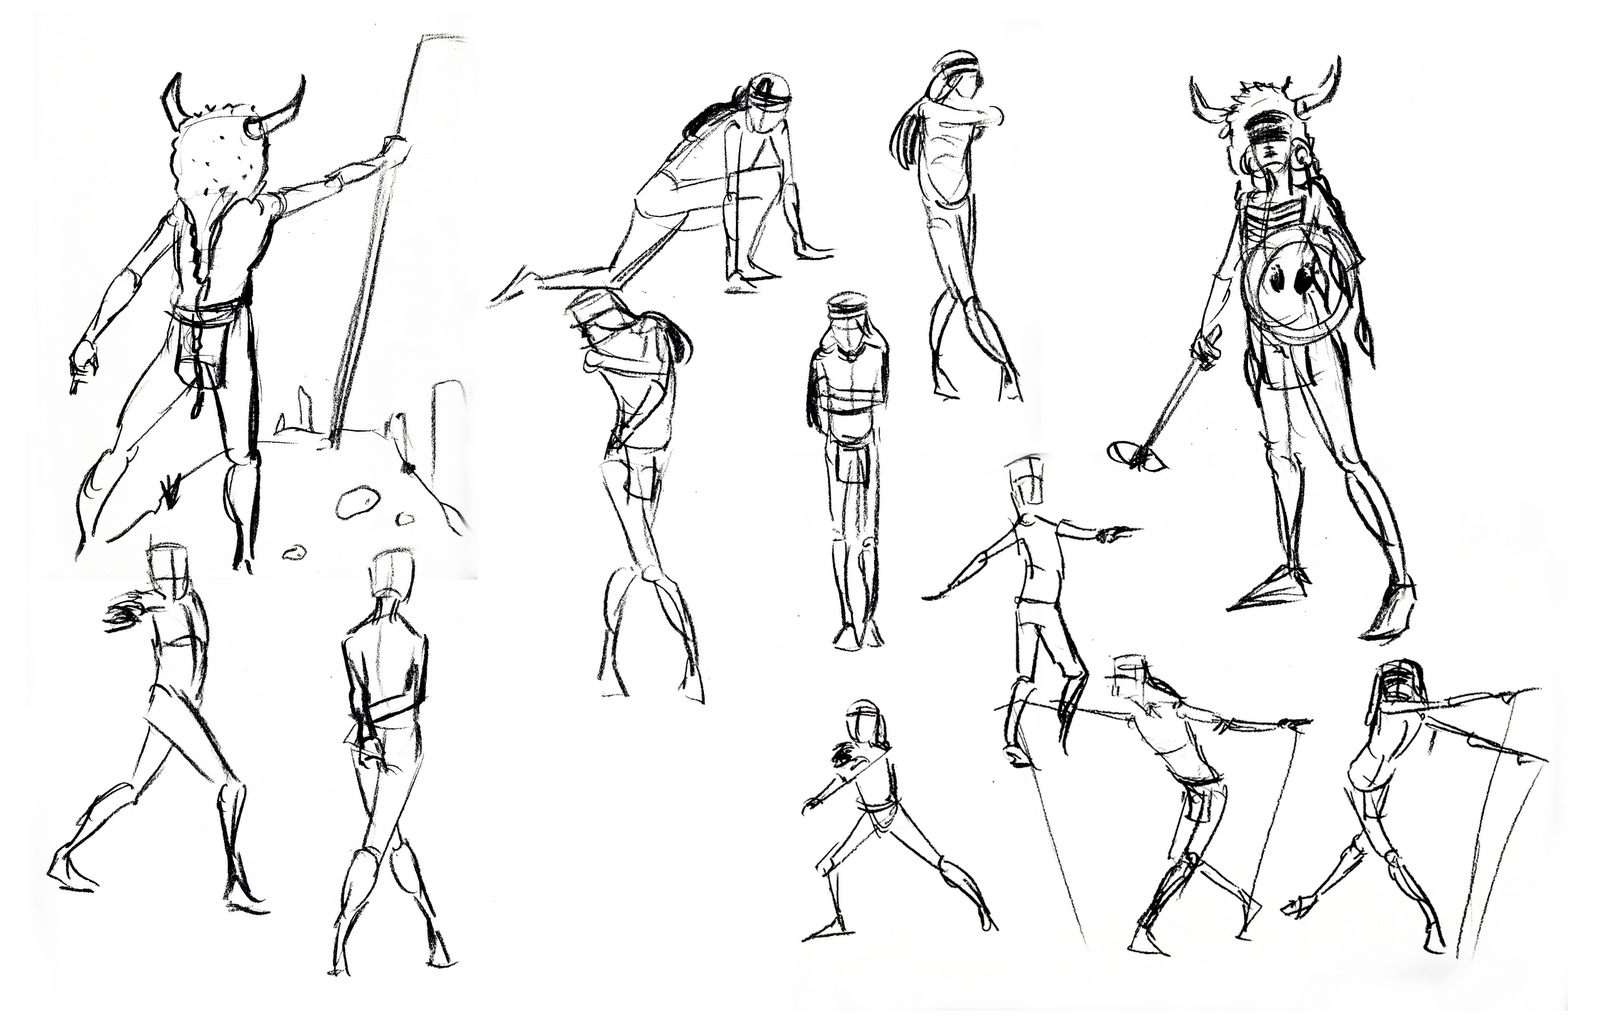 Unique Gesture Drawing Sketches for Adult